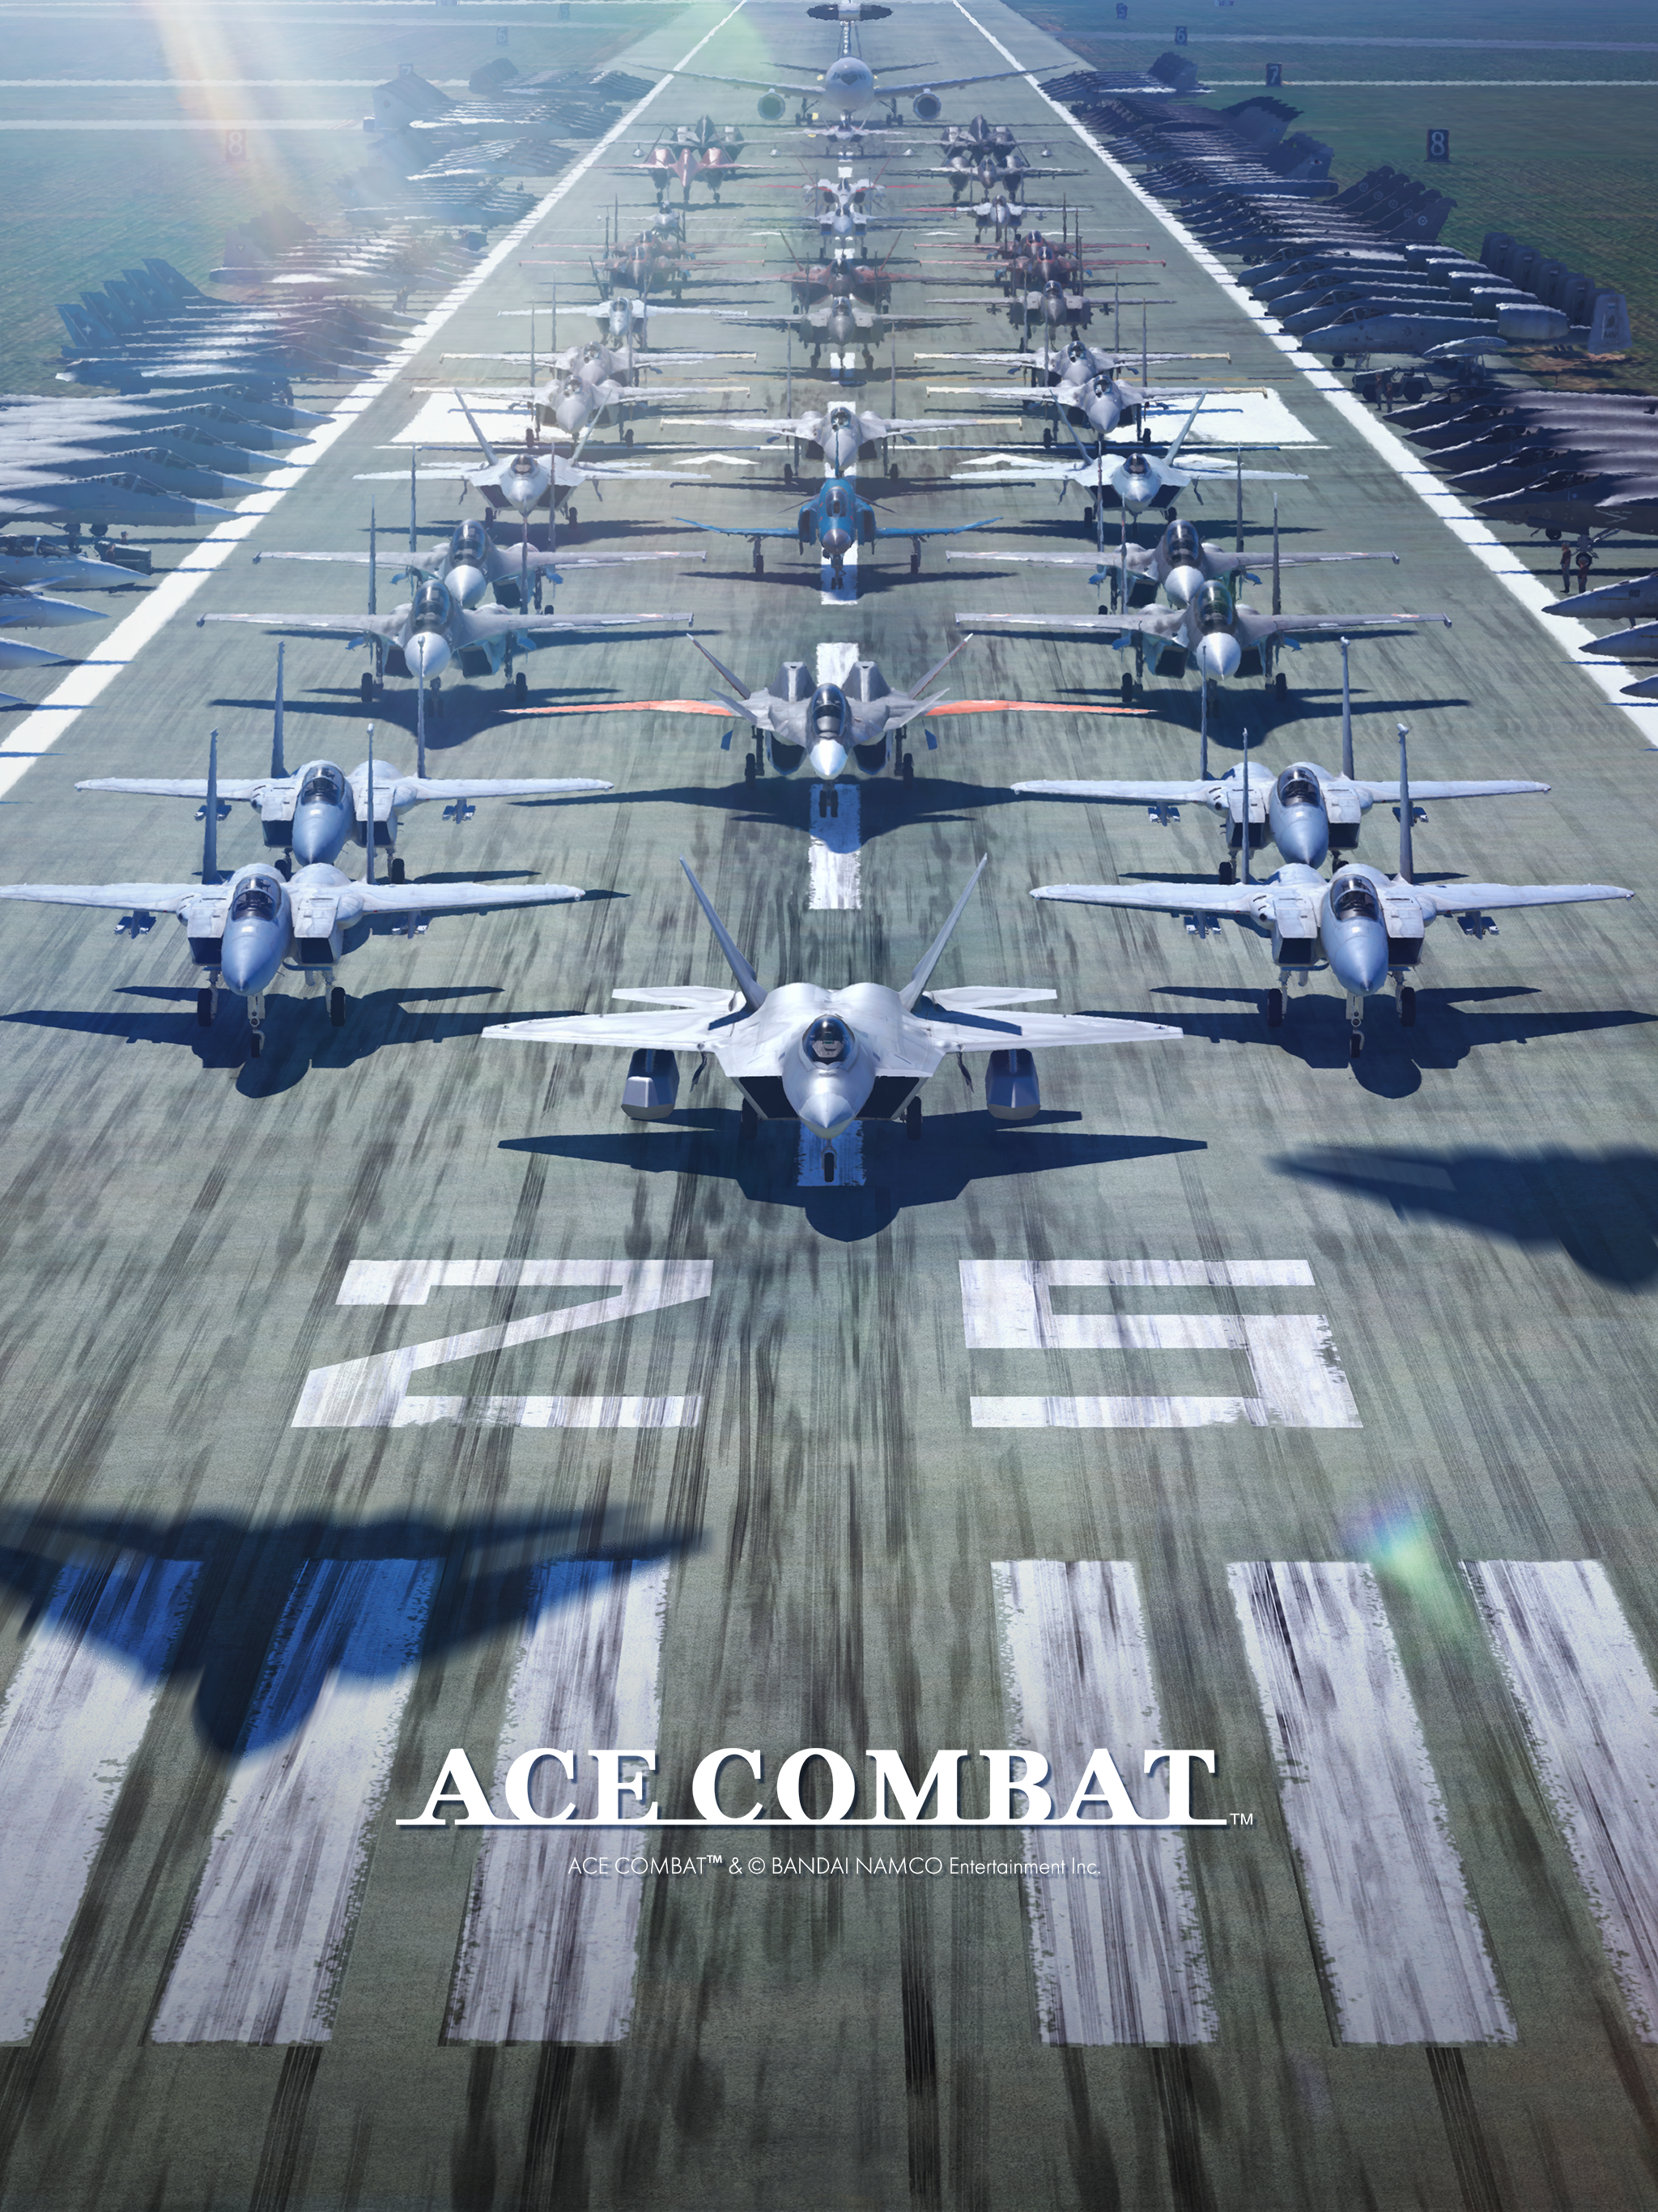 Top Gun Maverick DLC for Ace Combat 7 out now — Too Much Gaming